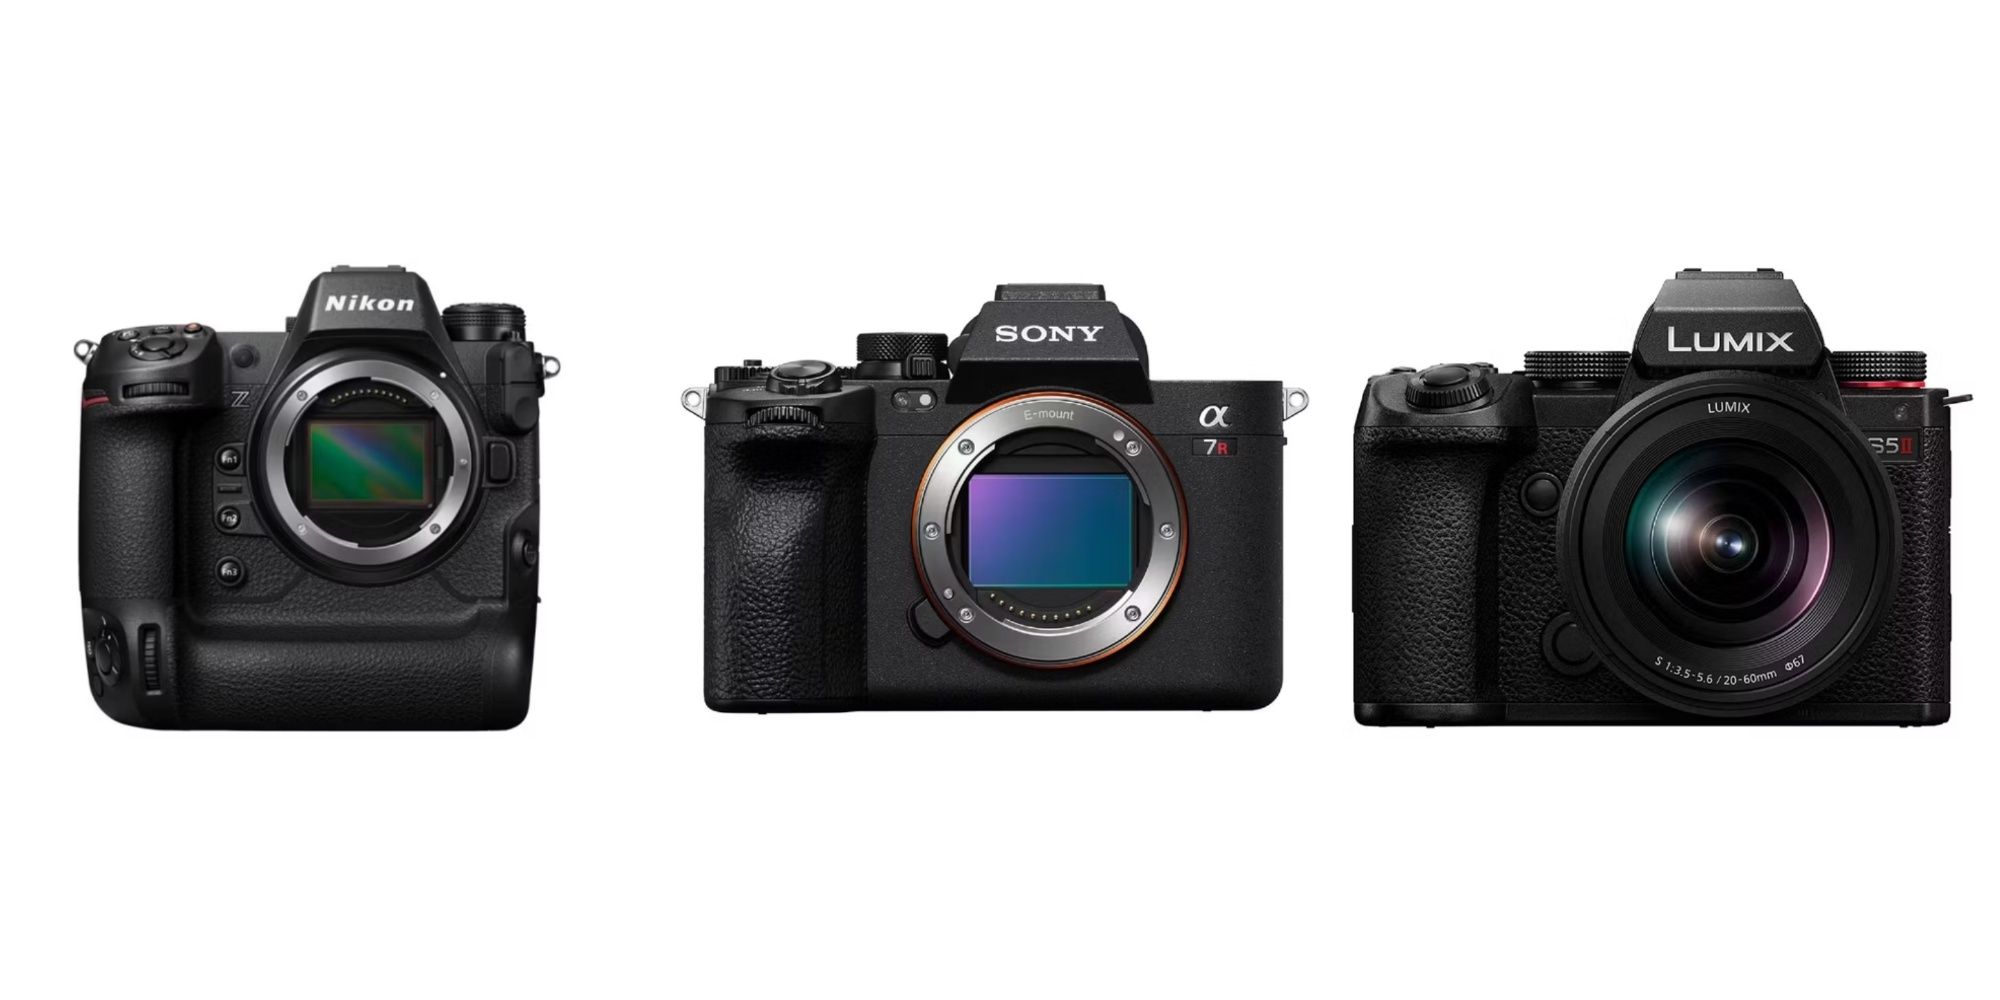 Nikon, Sony, and Lumix cameras on a white background